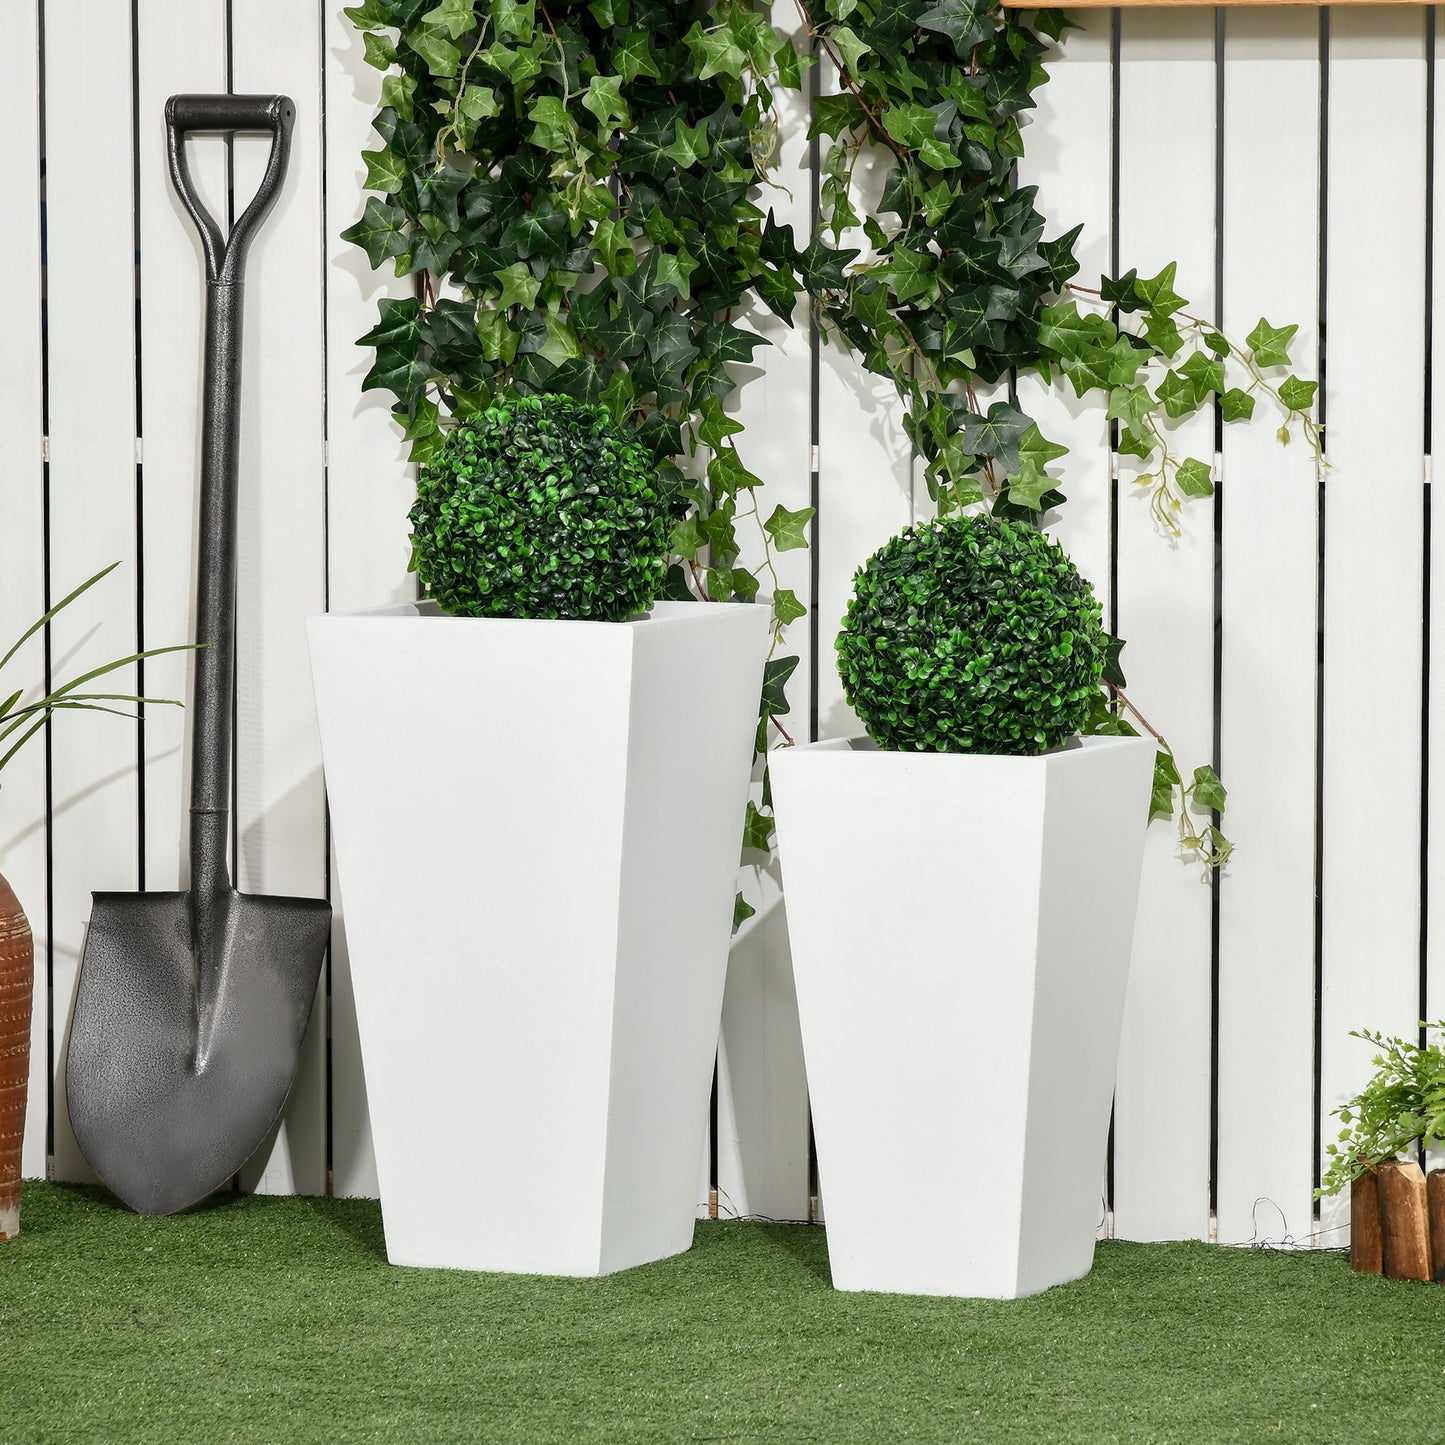 Outdoor and Garden-2-Pack Outdoor Planter Set, MgO Flower Pots with Drainage Holes, Durable & Stackable, for Entryway, Patio, Yard, Garden, White - Outdoor Style Company